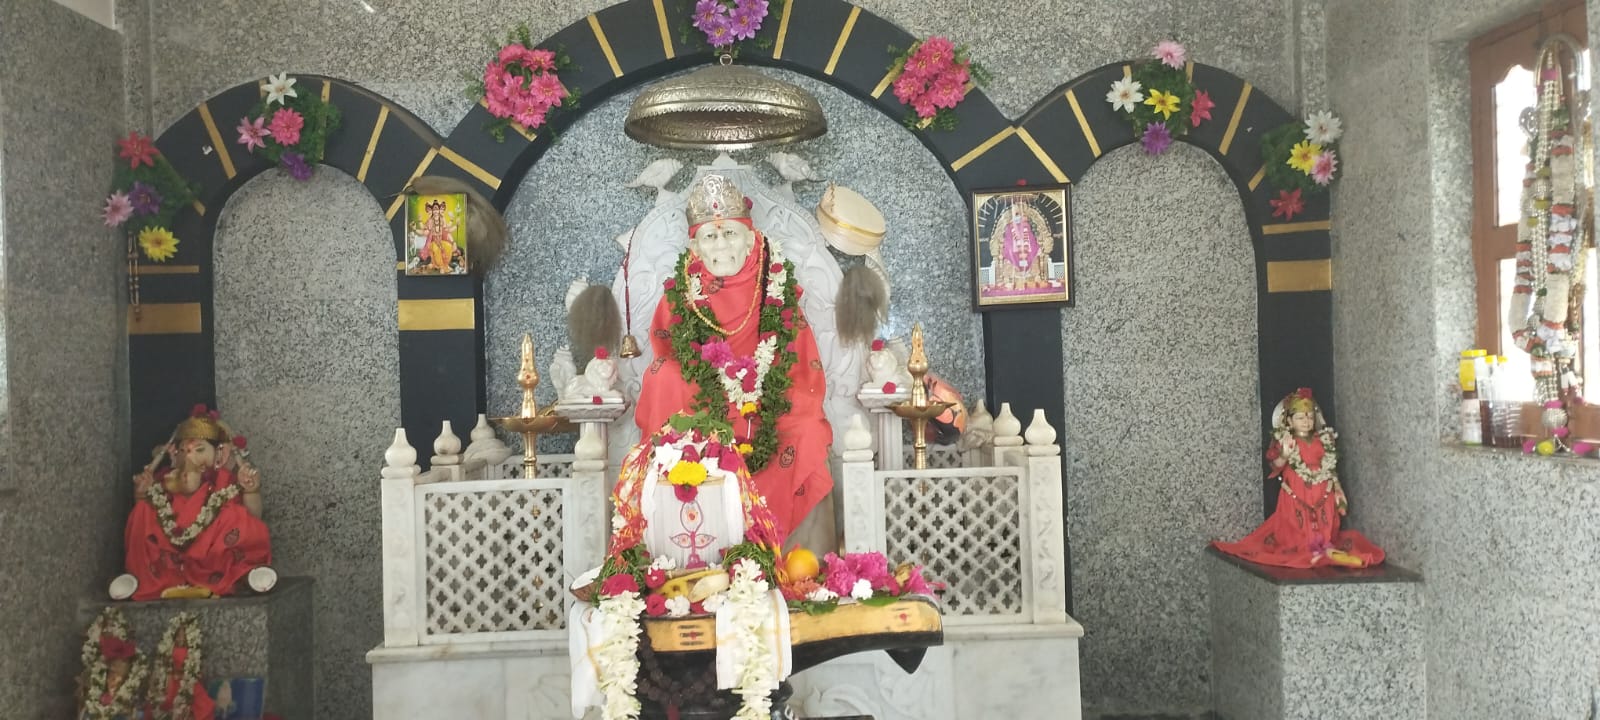 special-pujas-at-sai-baba-temple-on-the-occasion-of-guru-poornami